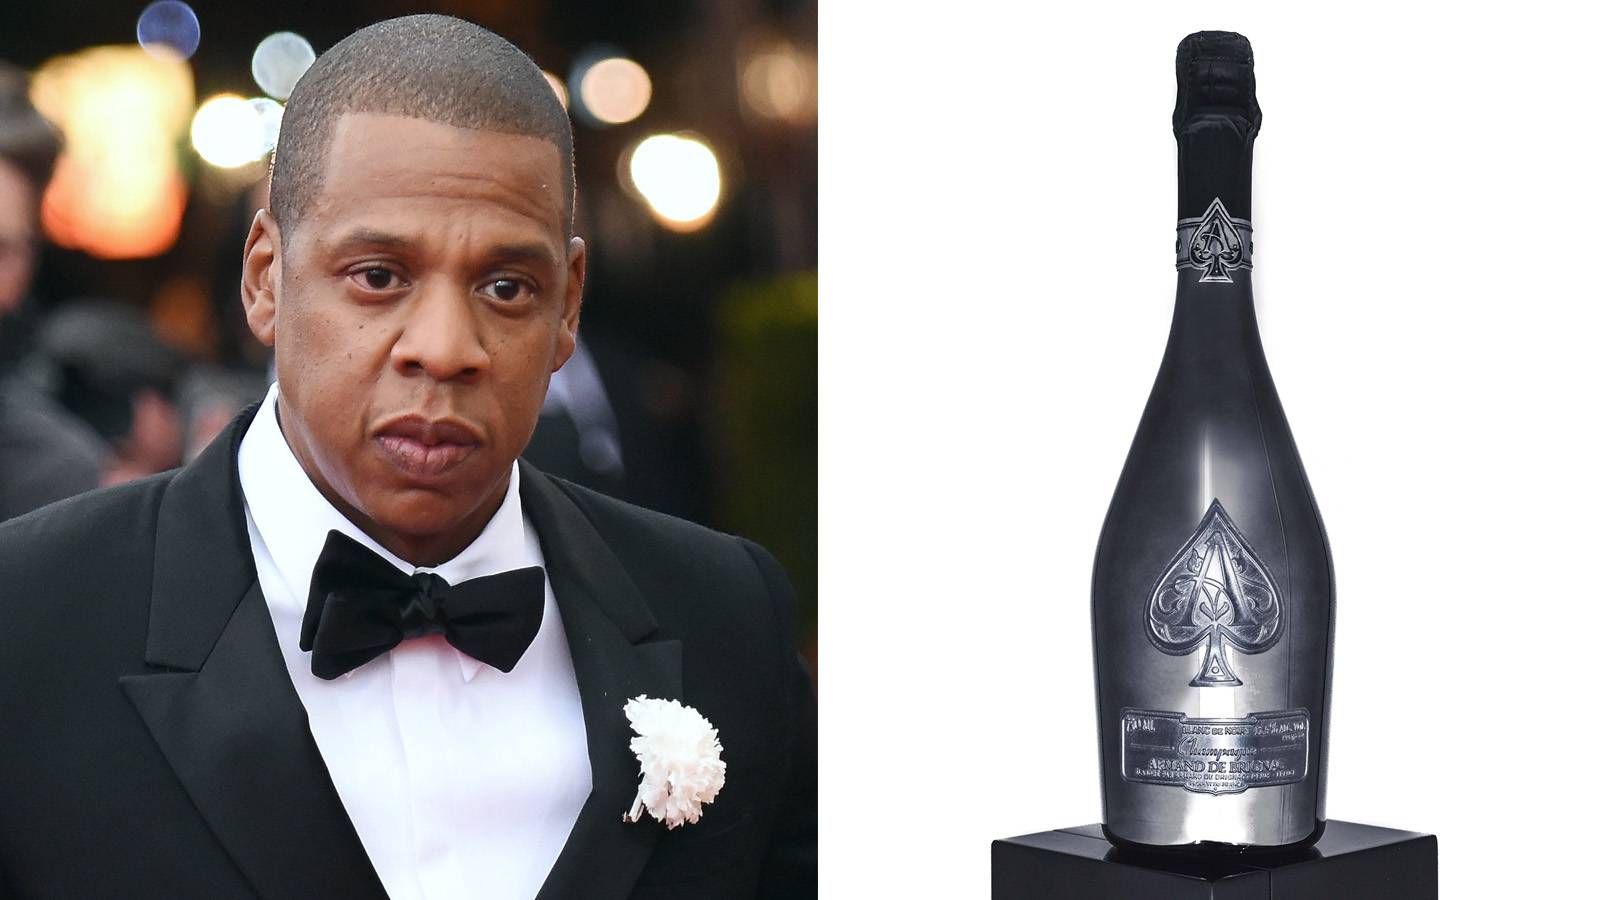 Jay-Z buys into 'Ace of Spades' champagne